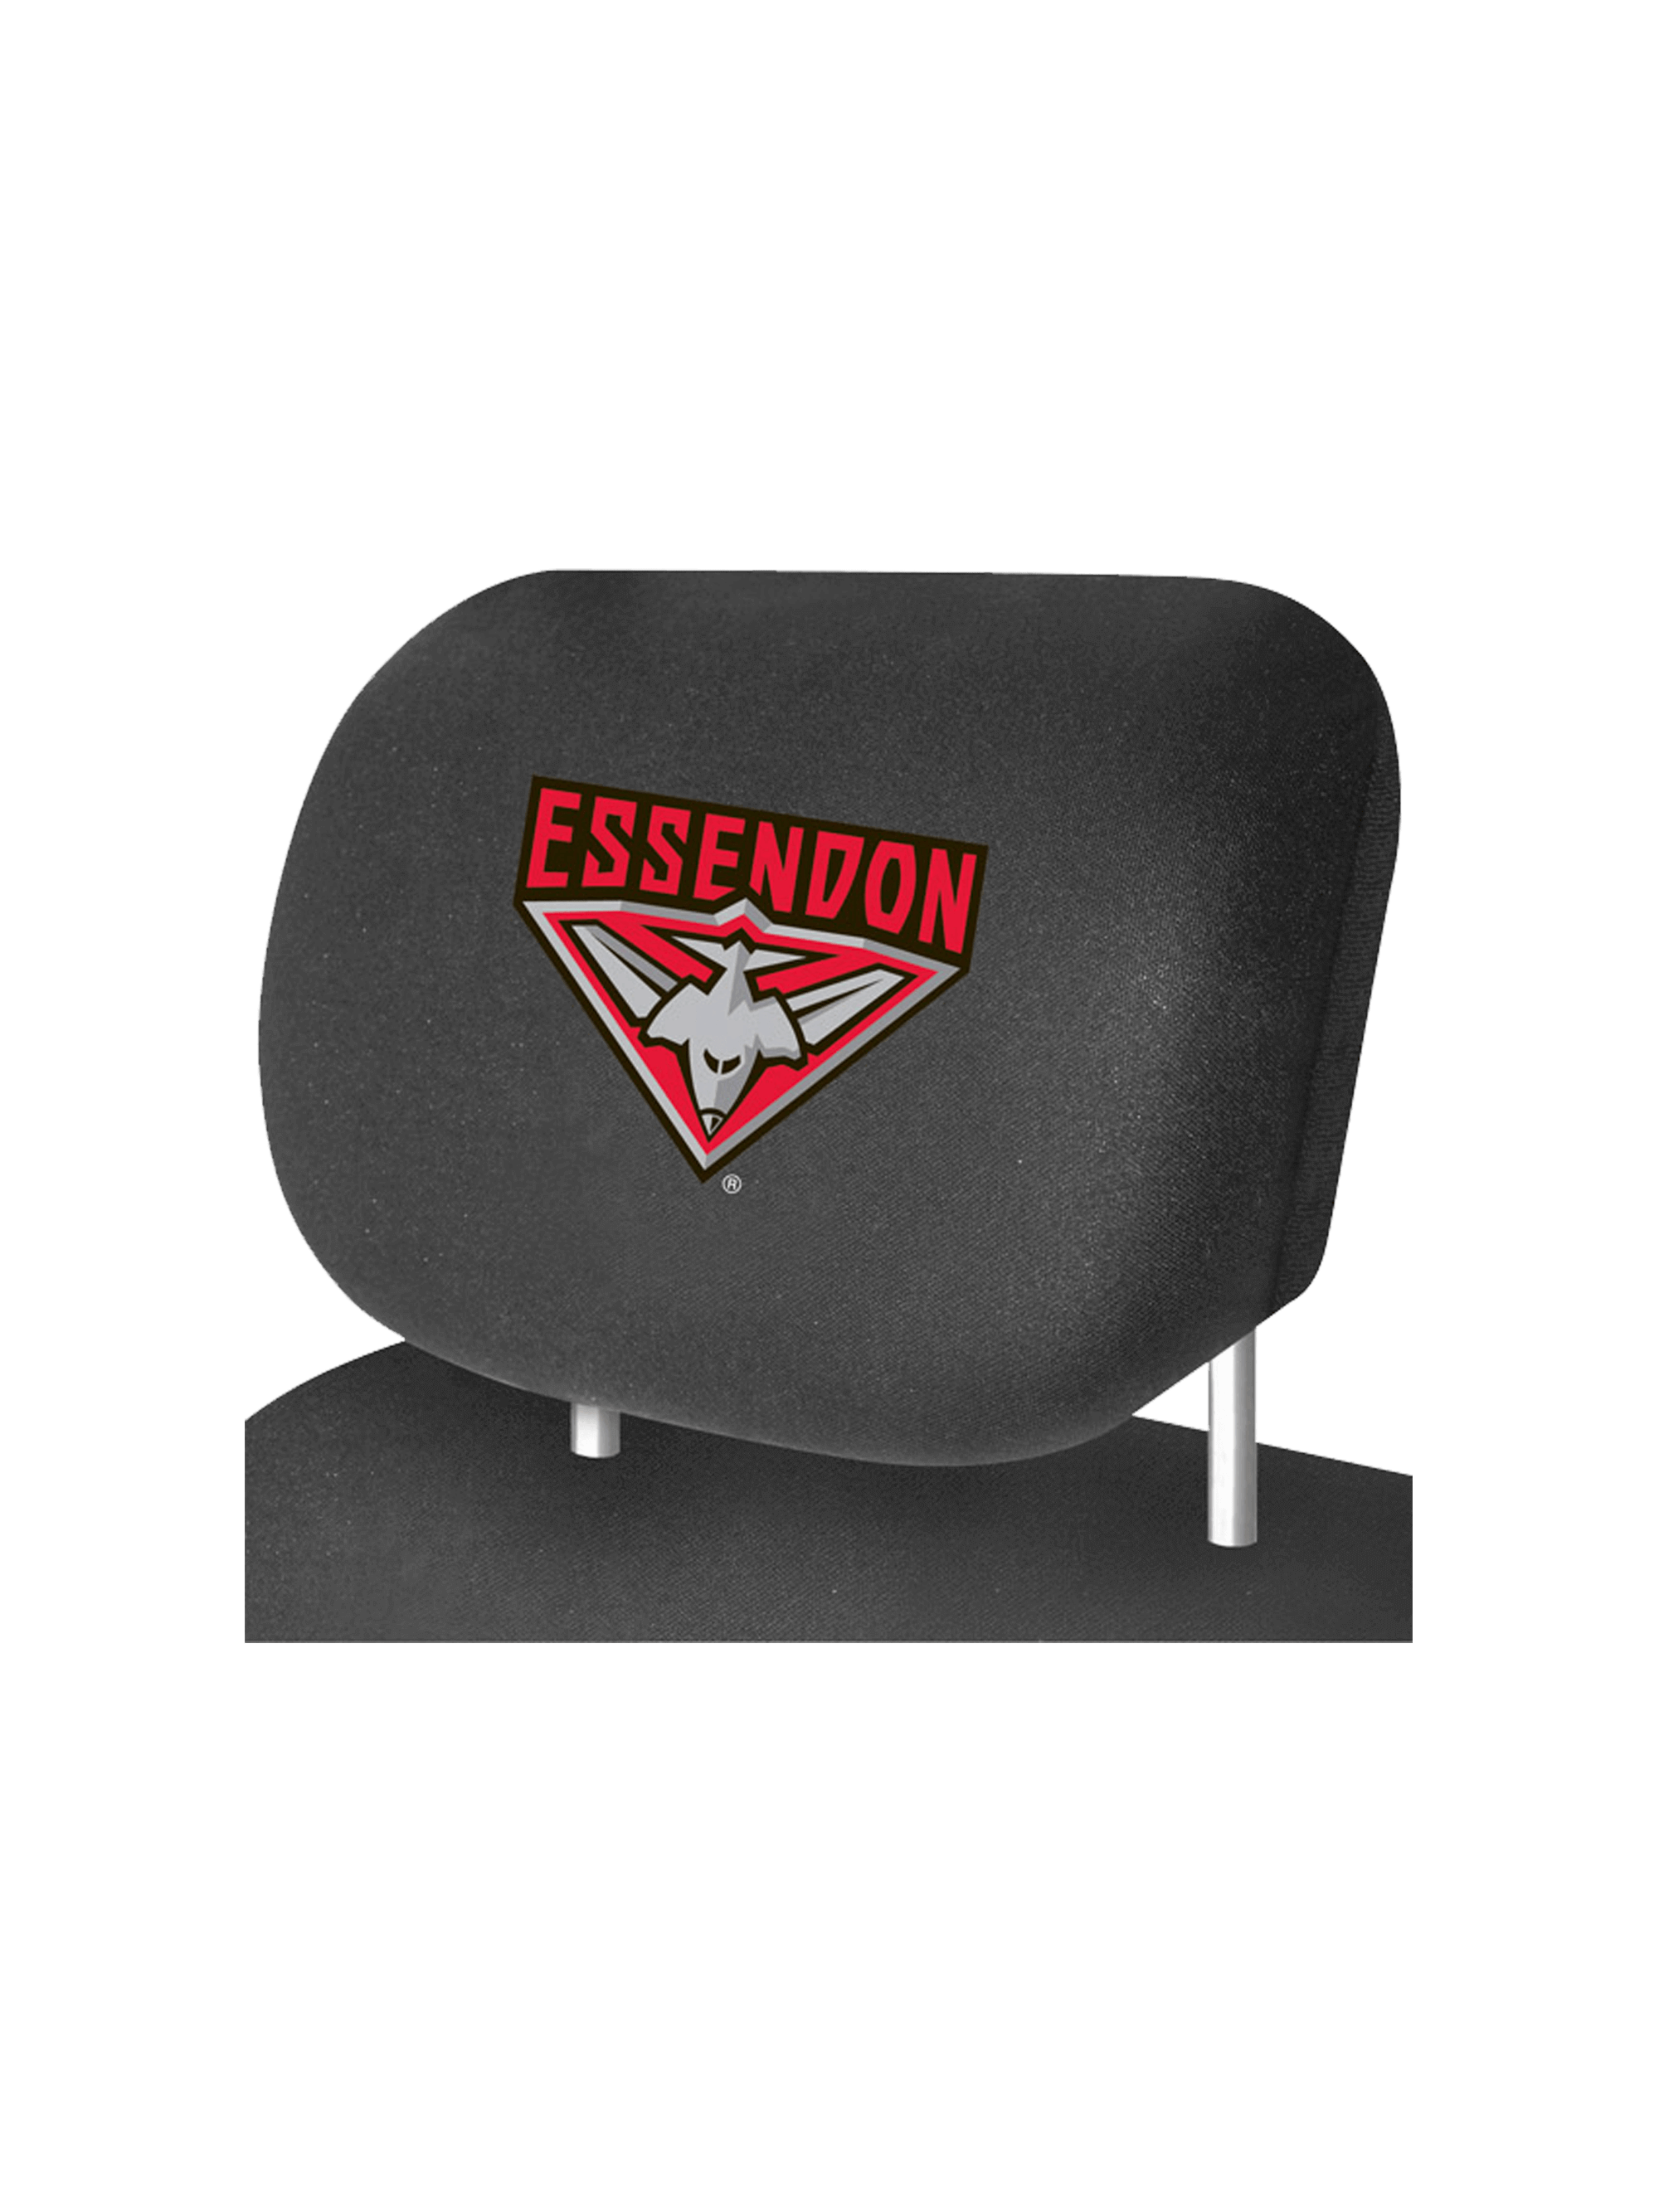 ESSENDON BOMBERS OFFICIAL HEADREST COVER_ESSENDON BOMBERS_STUBBY CLUB